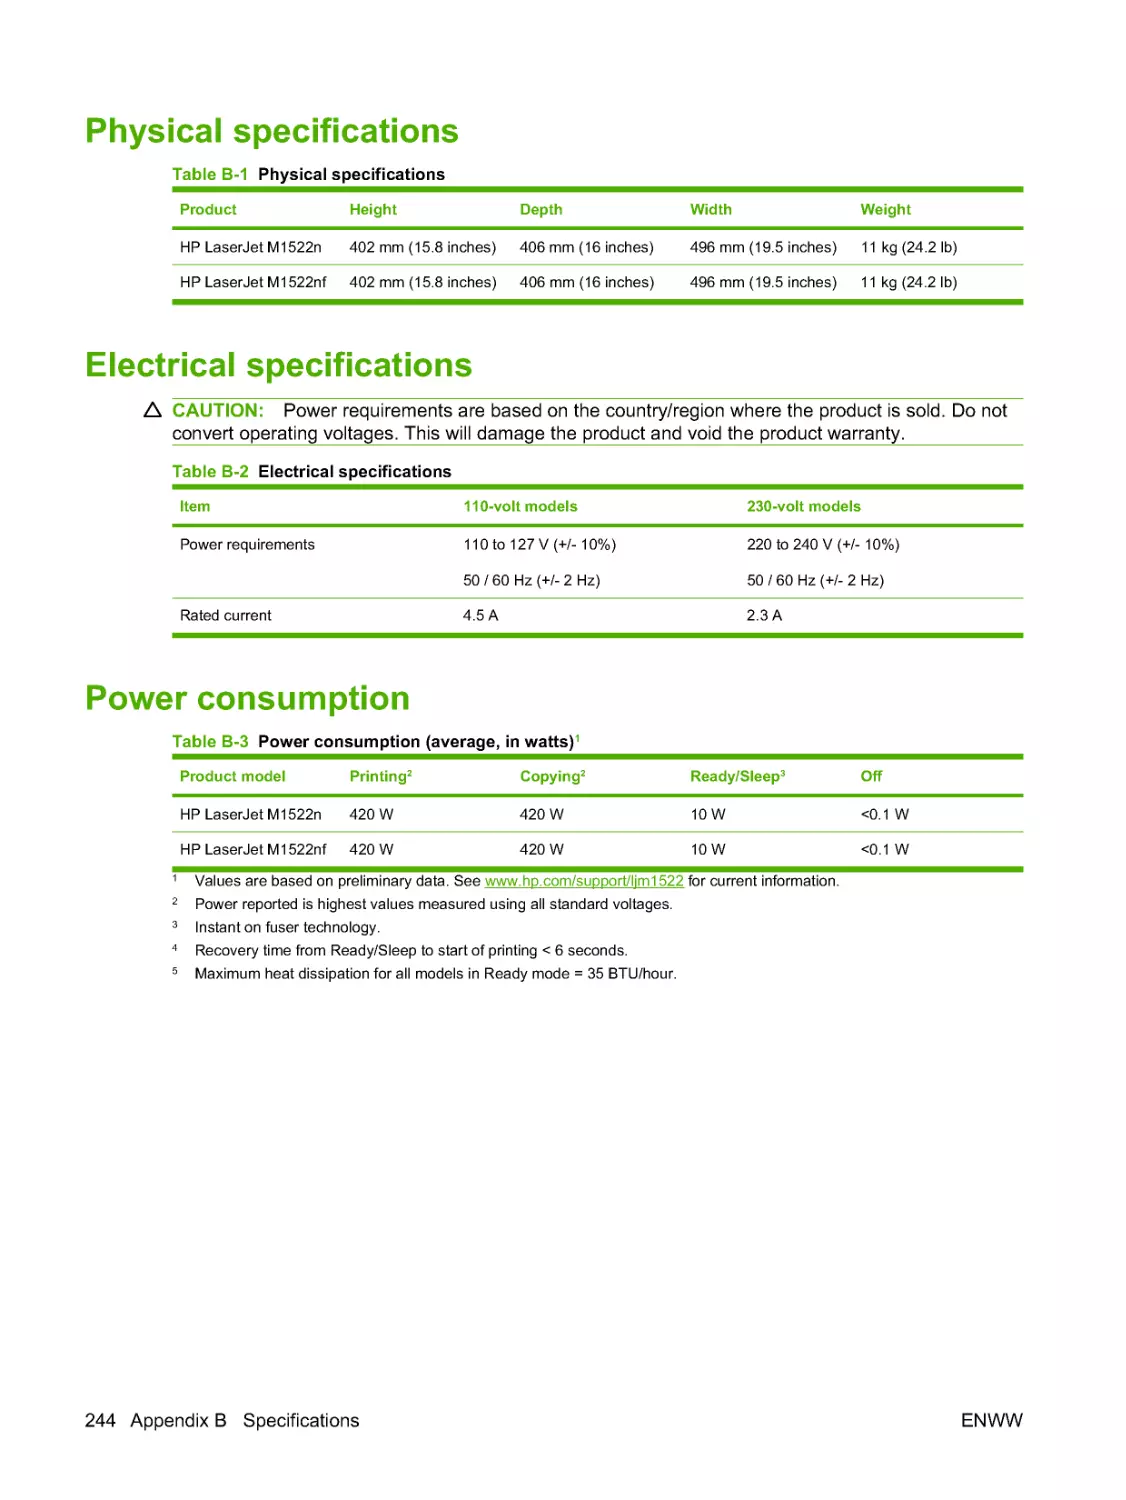 Electrical specifications
Power consumption